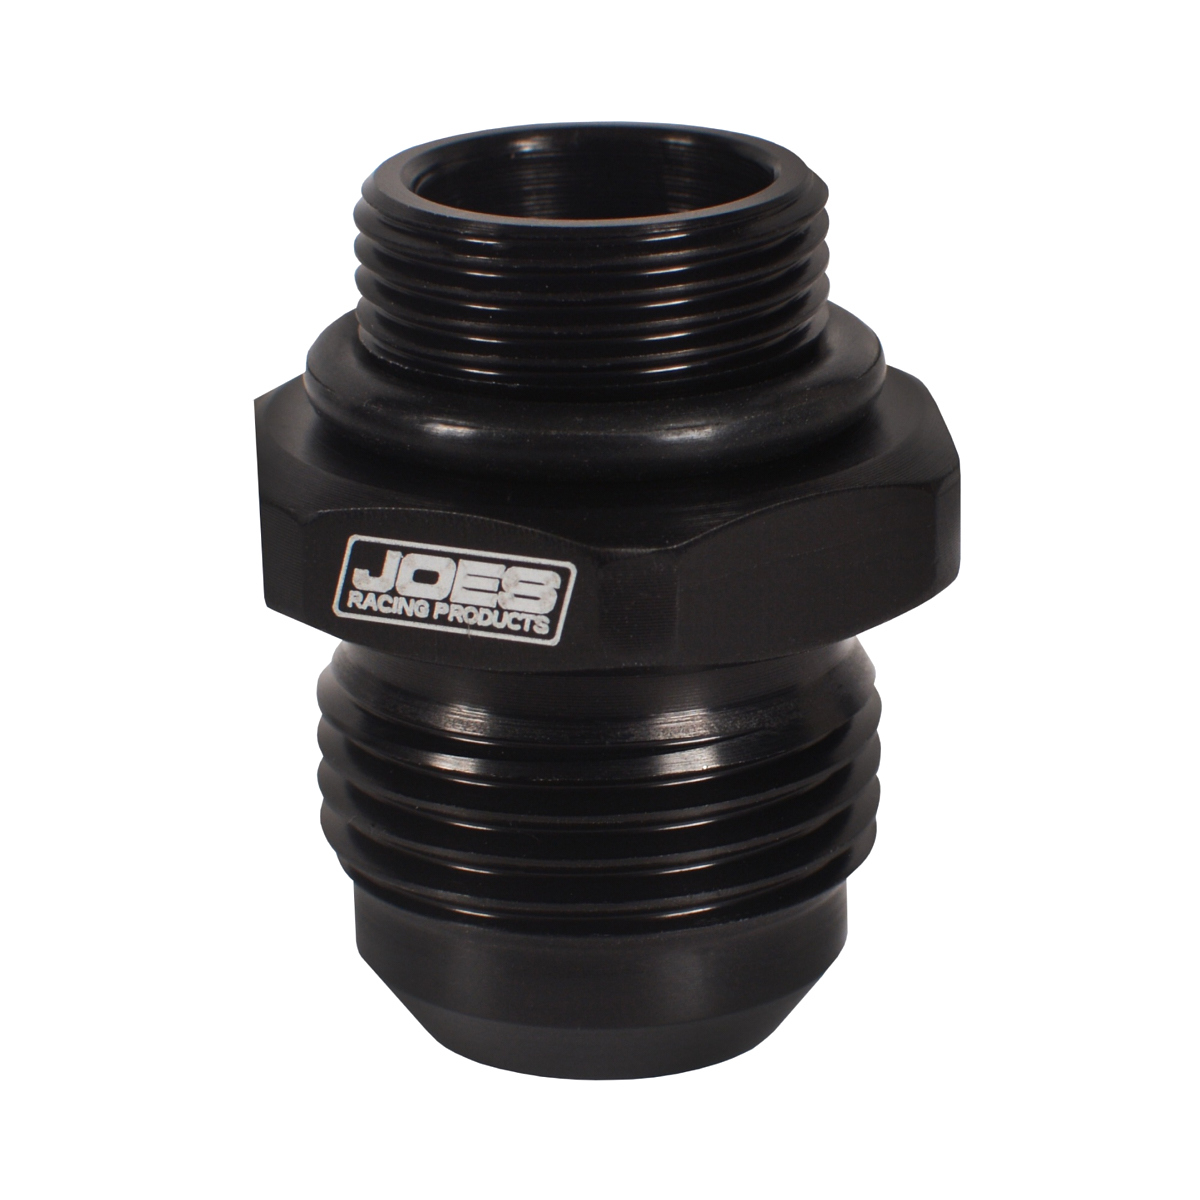 Joes Racing Products 42735 Fitting, Adapter, Straight, 22 mm x 1.5 Male O-Ring to 12 AN Male, Aluminum, Black Anodized, Each